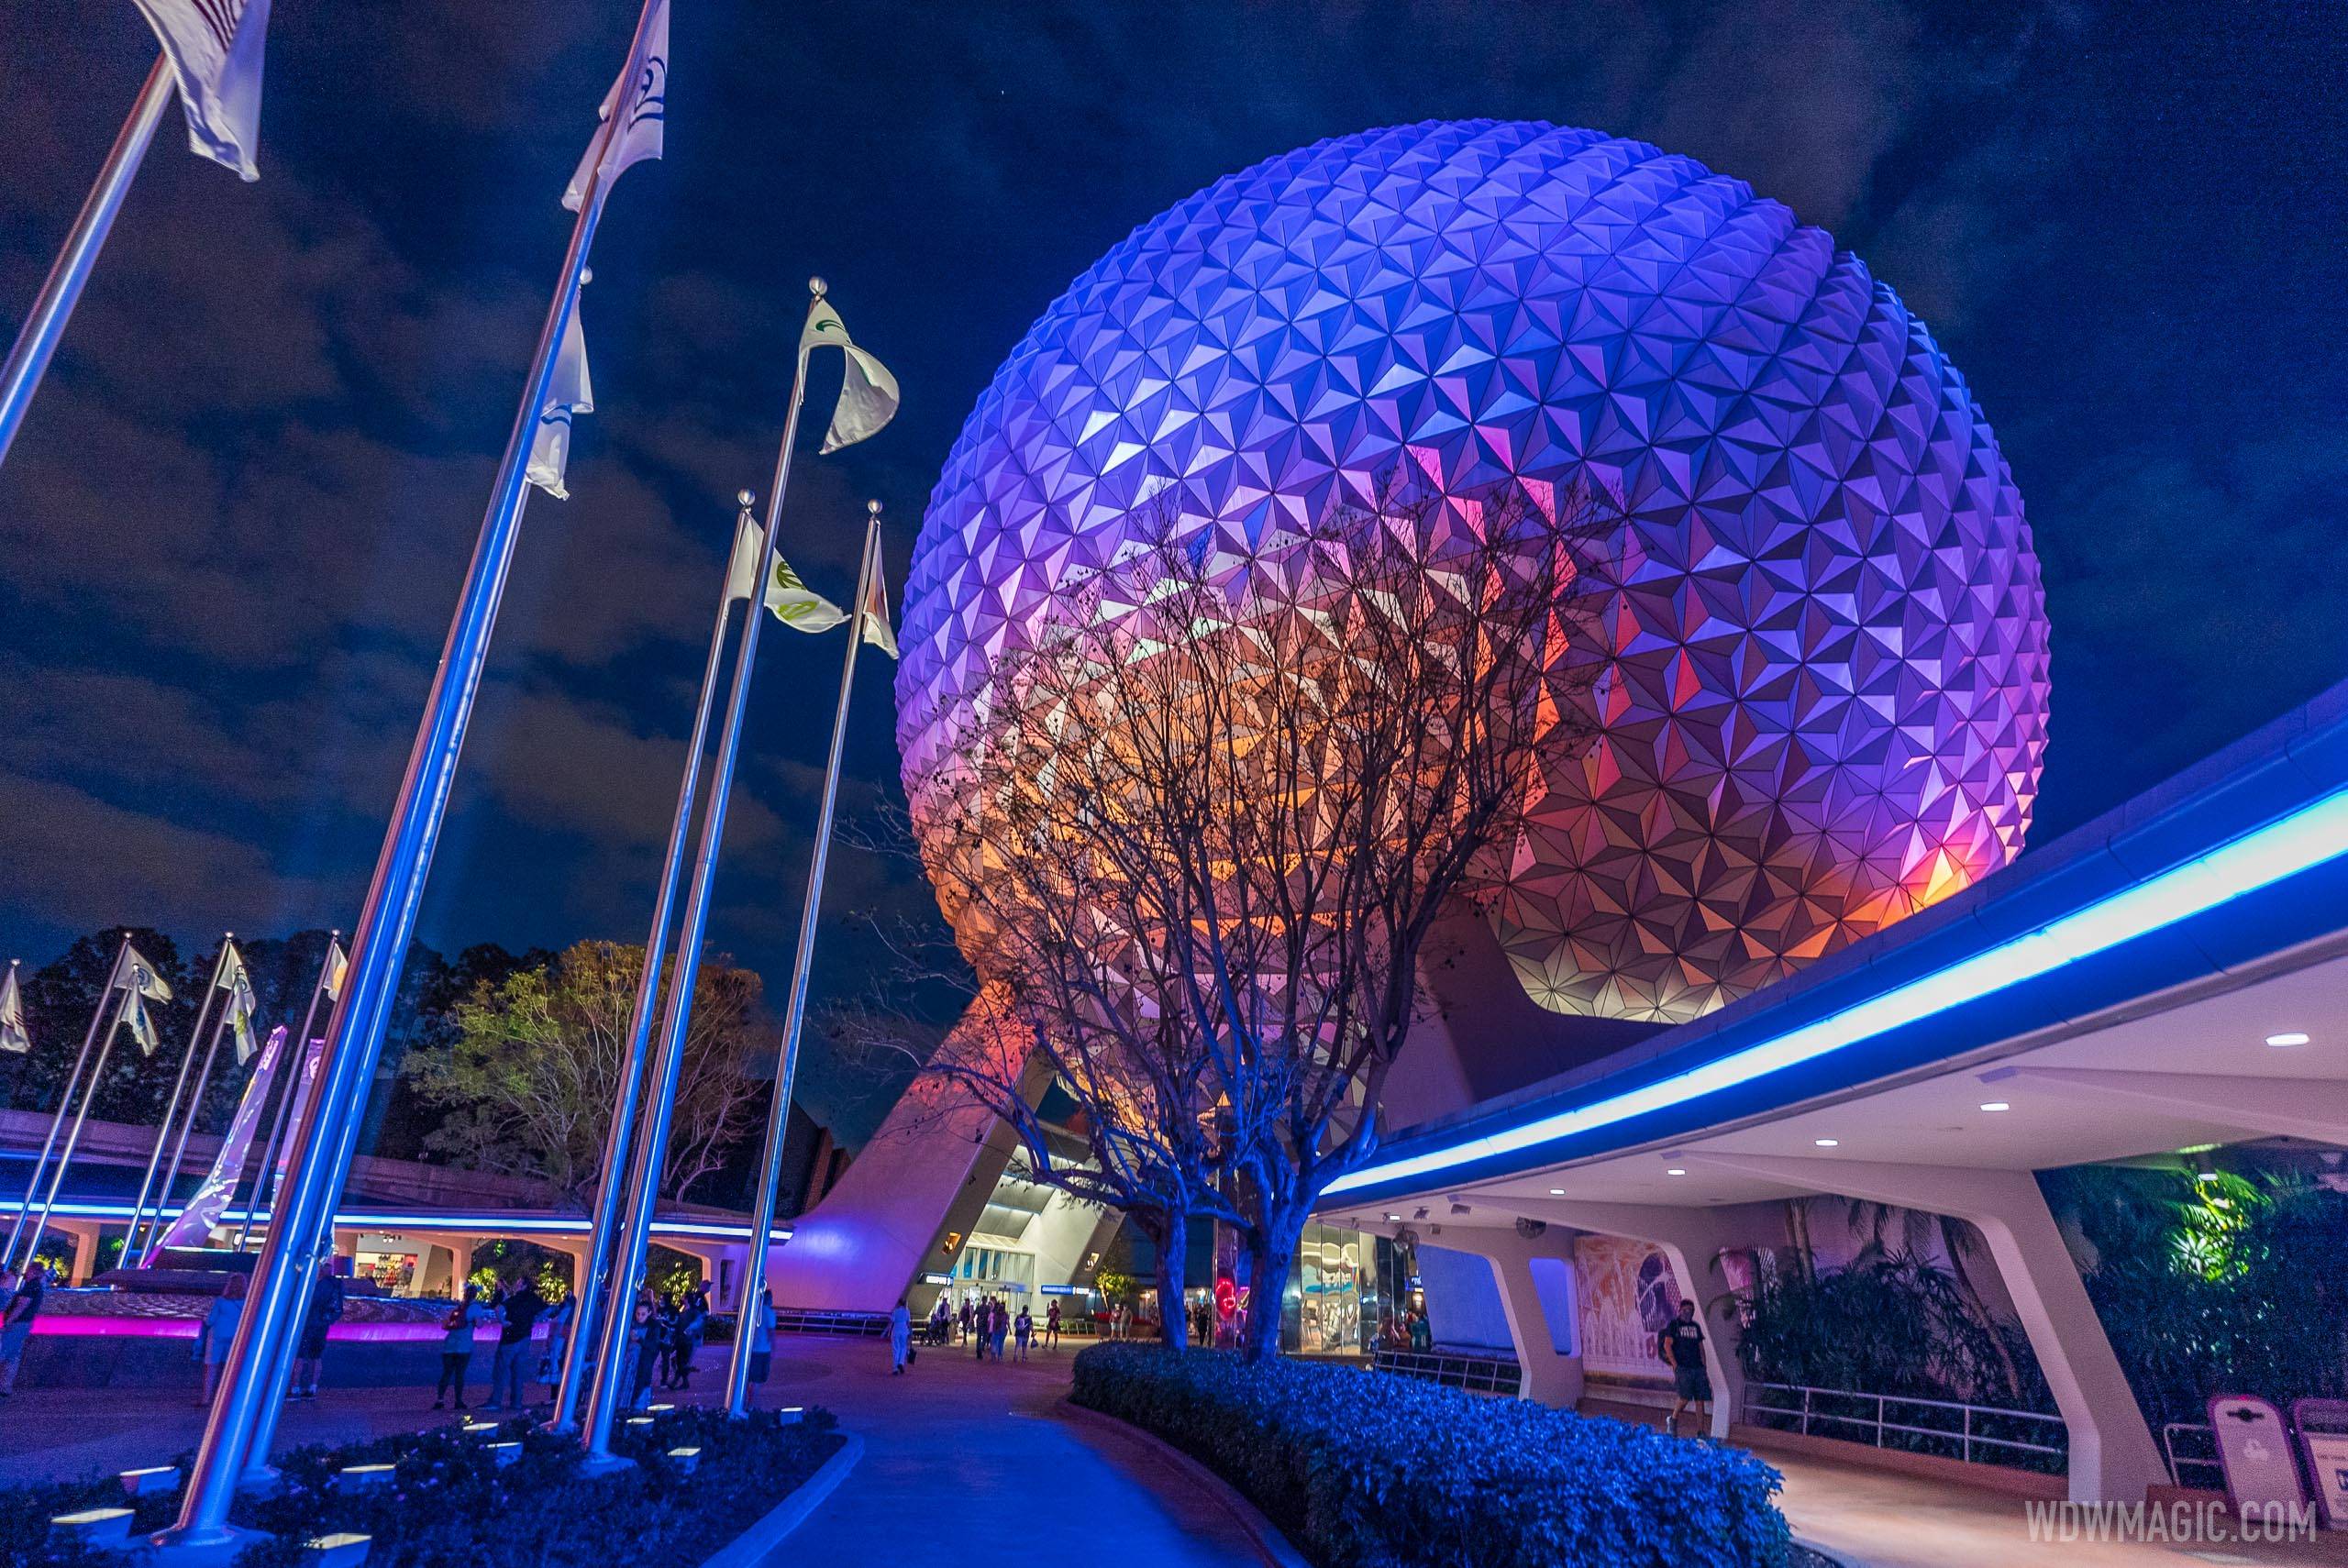 EPCOT's October 1 hours are 9am to 10pm